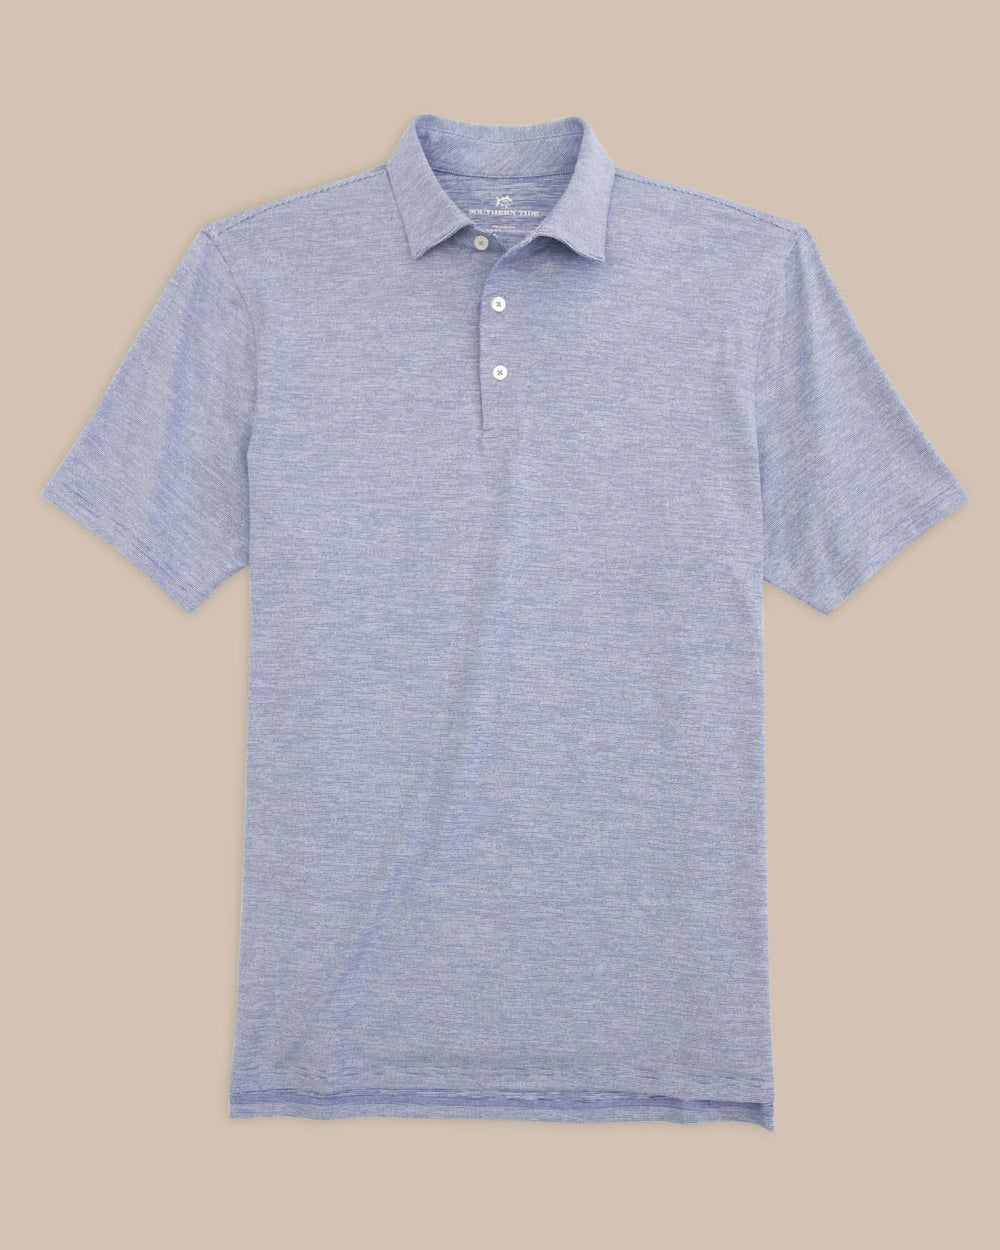 The front view of the Team Colors Driver Spacedye Polo Shirt by Southern Tide - University Blue